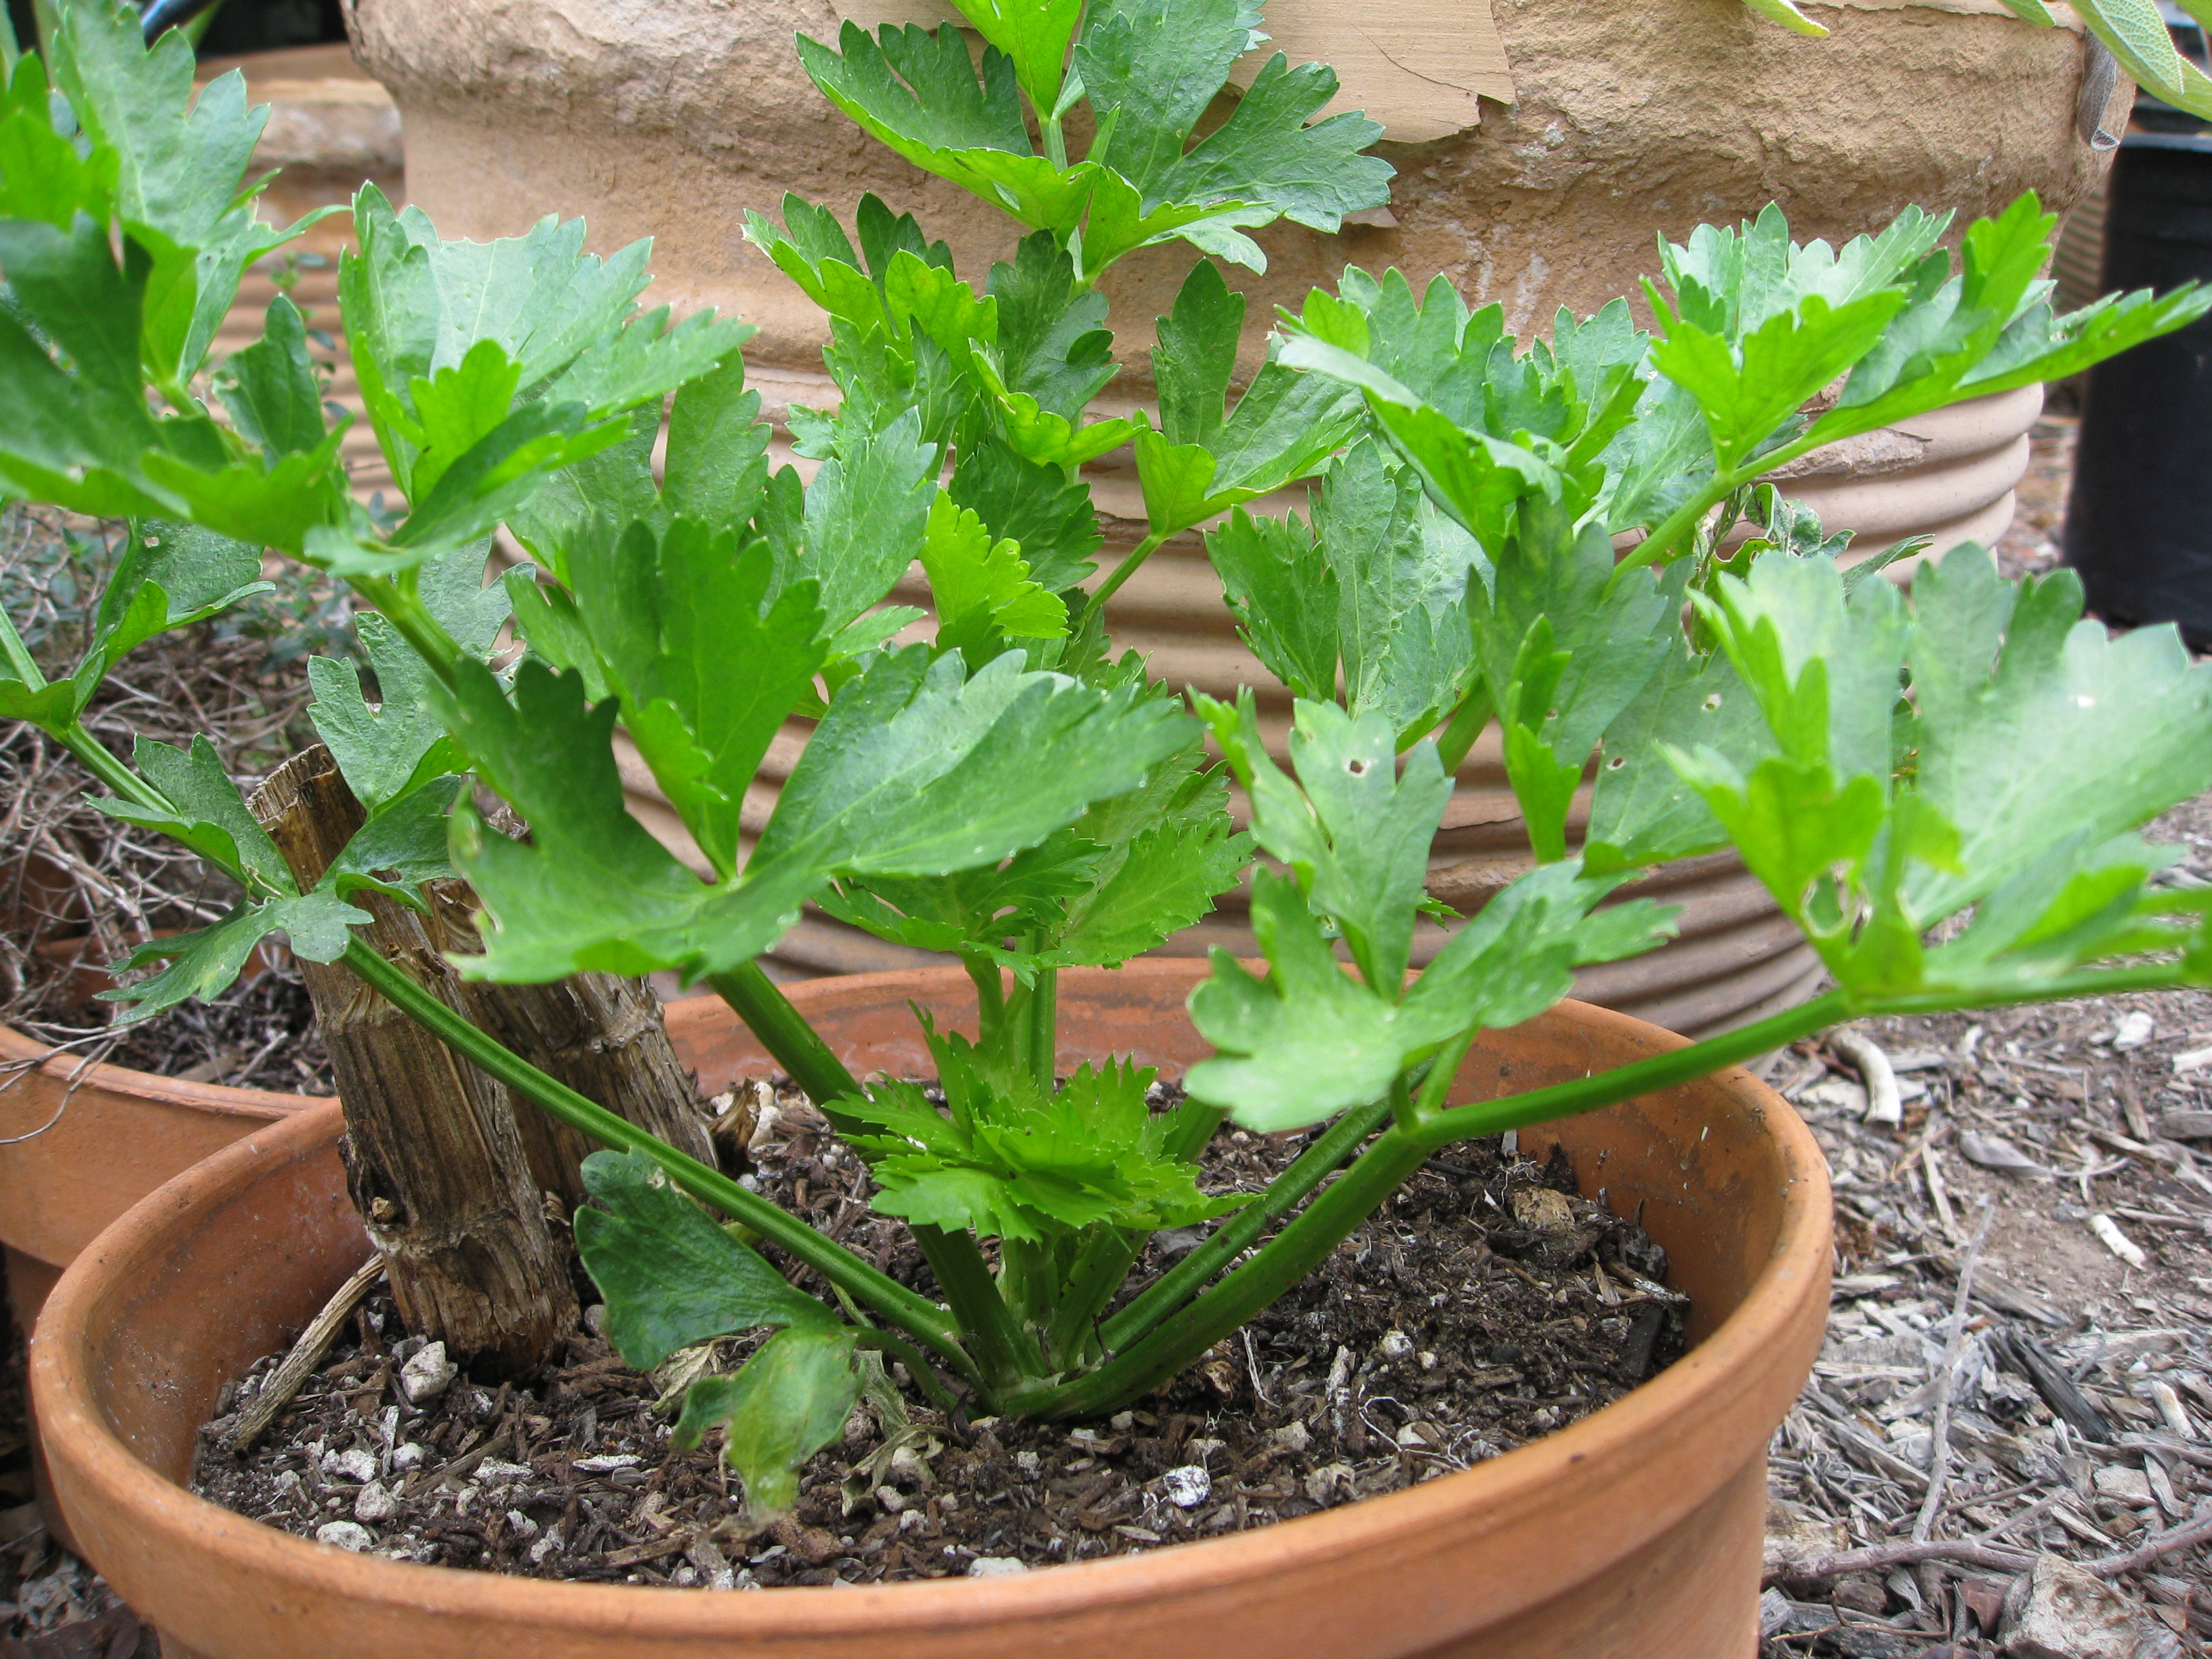 Celery has a bitter, strong unless it is blanched.